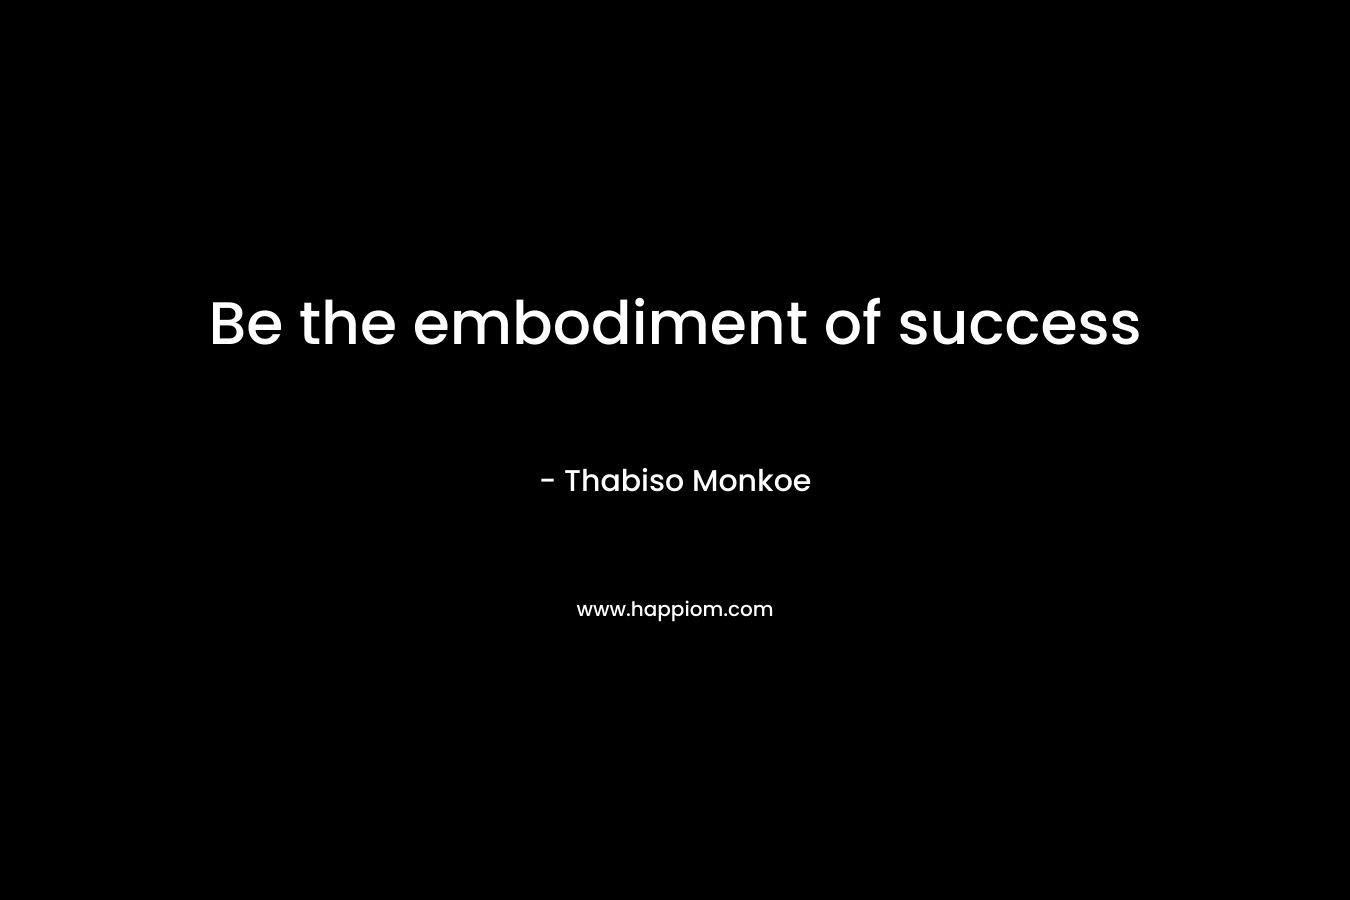 Be the embodiment of success